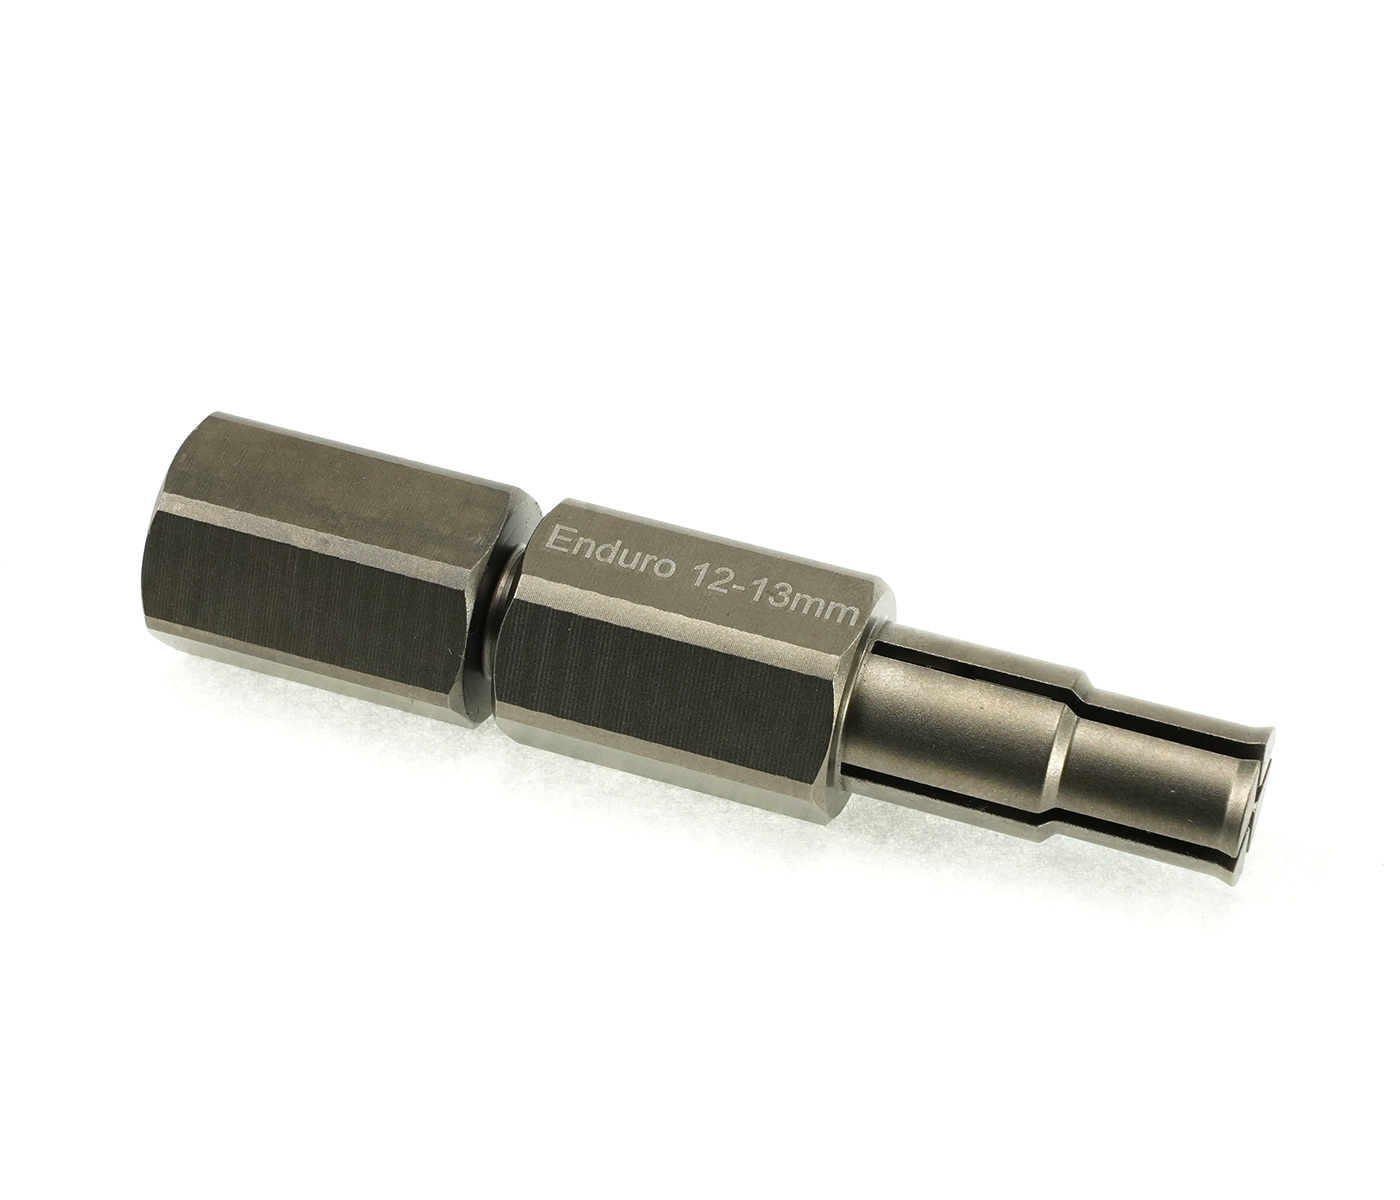 Enduro Puller 12-13 SS - Stainless steel , bearing pullers for bearings with 12-13mm IDs